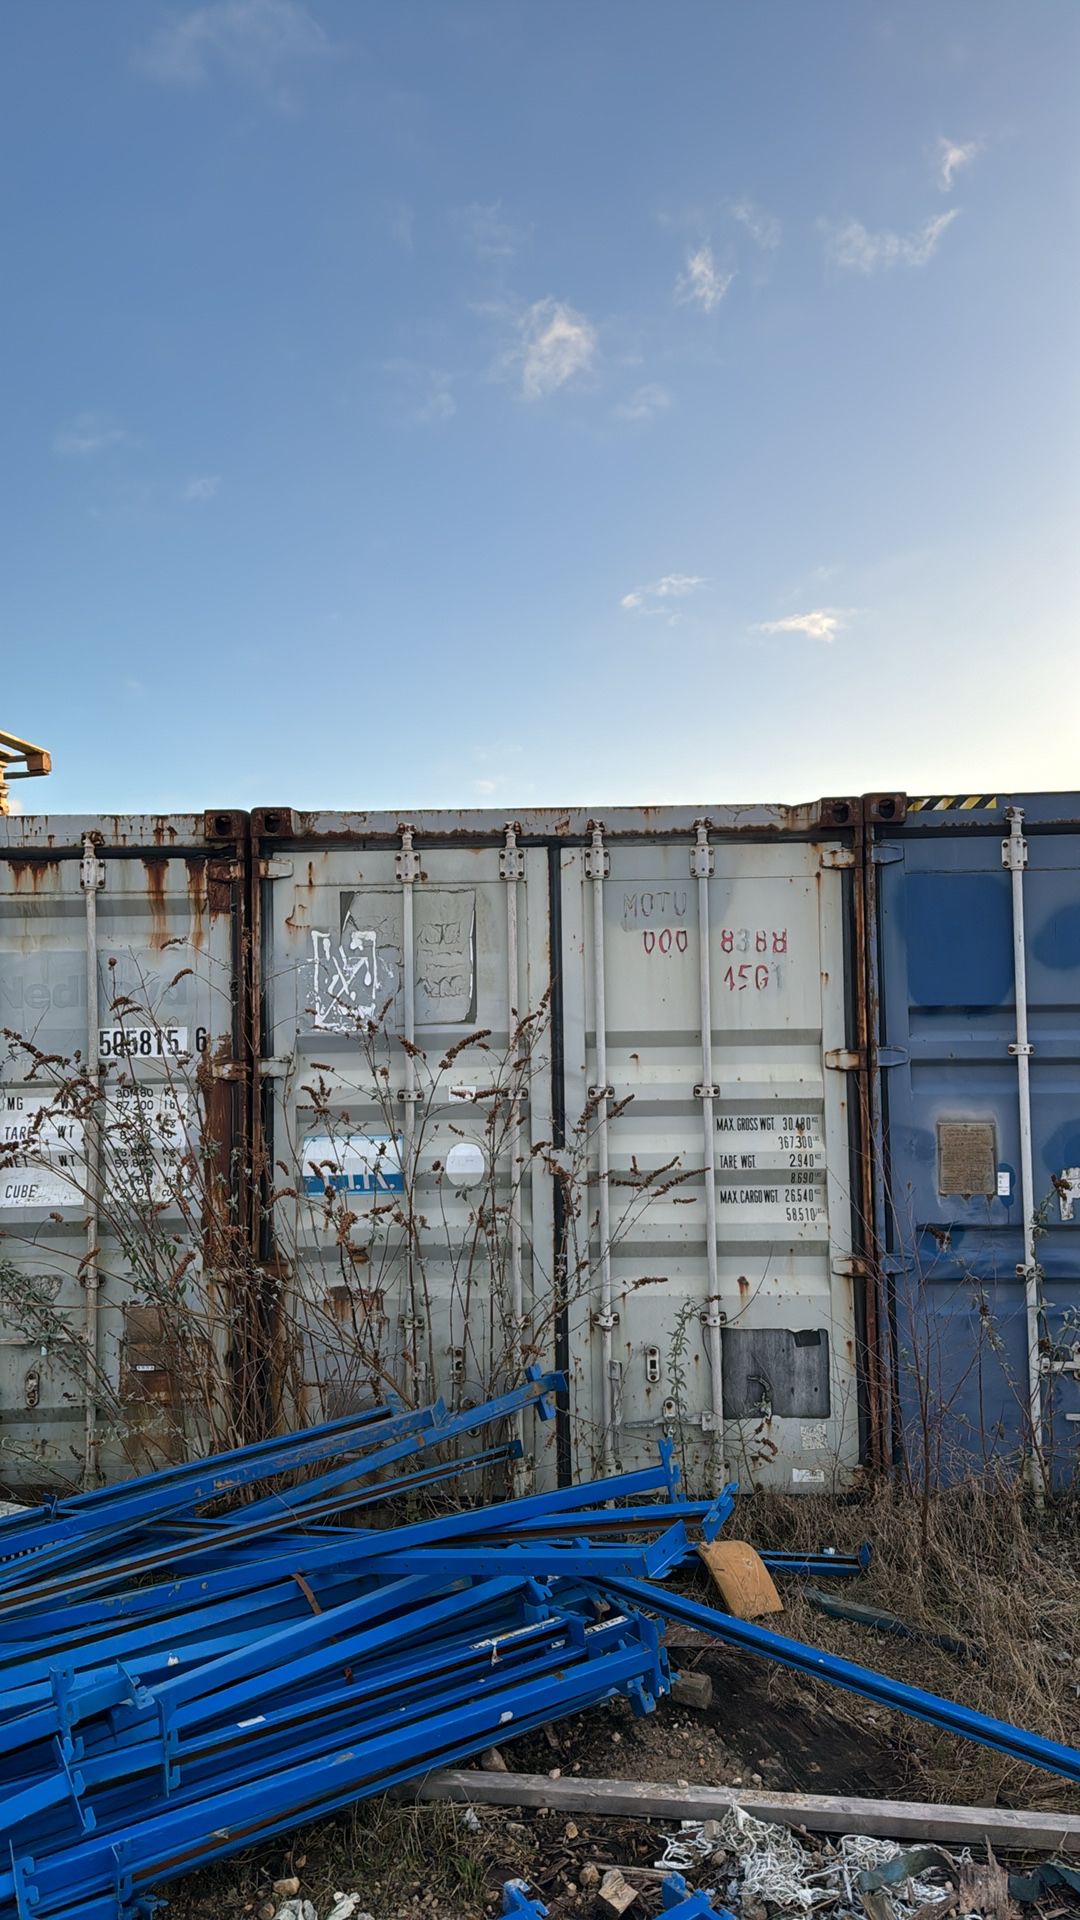 Shipping Container - 11 MOTU000838815G - Image 2 of 2